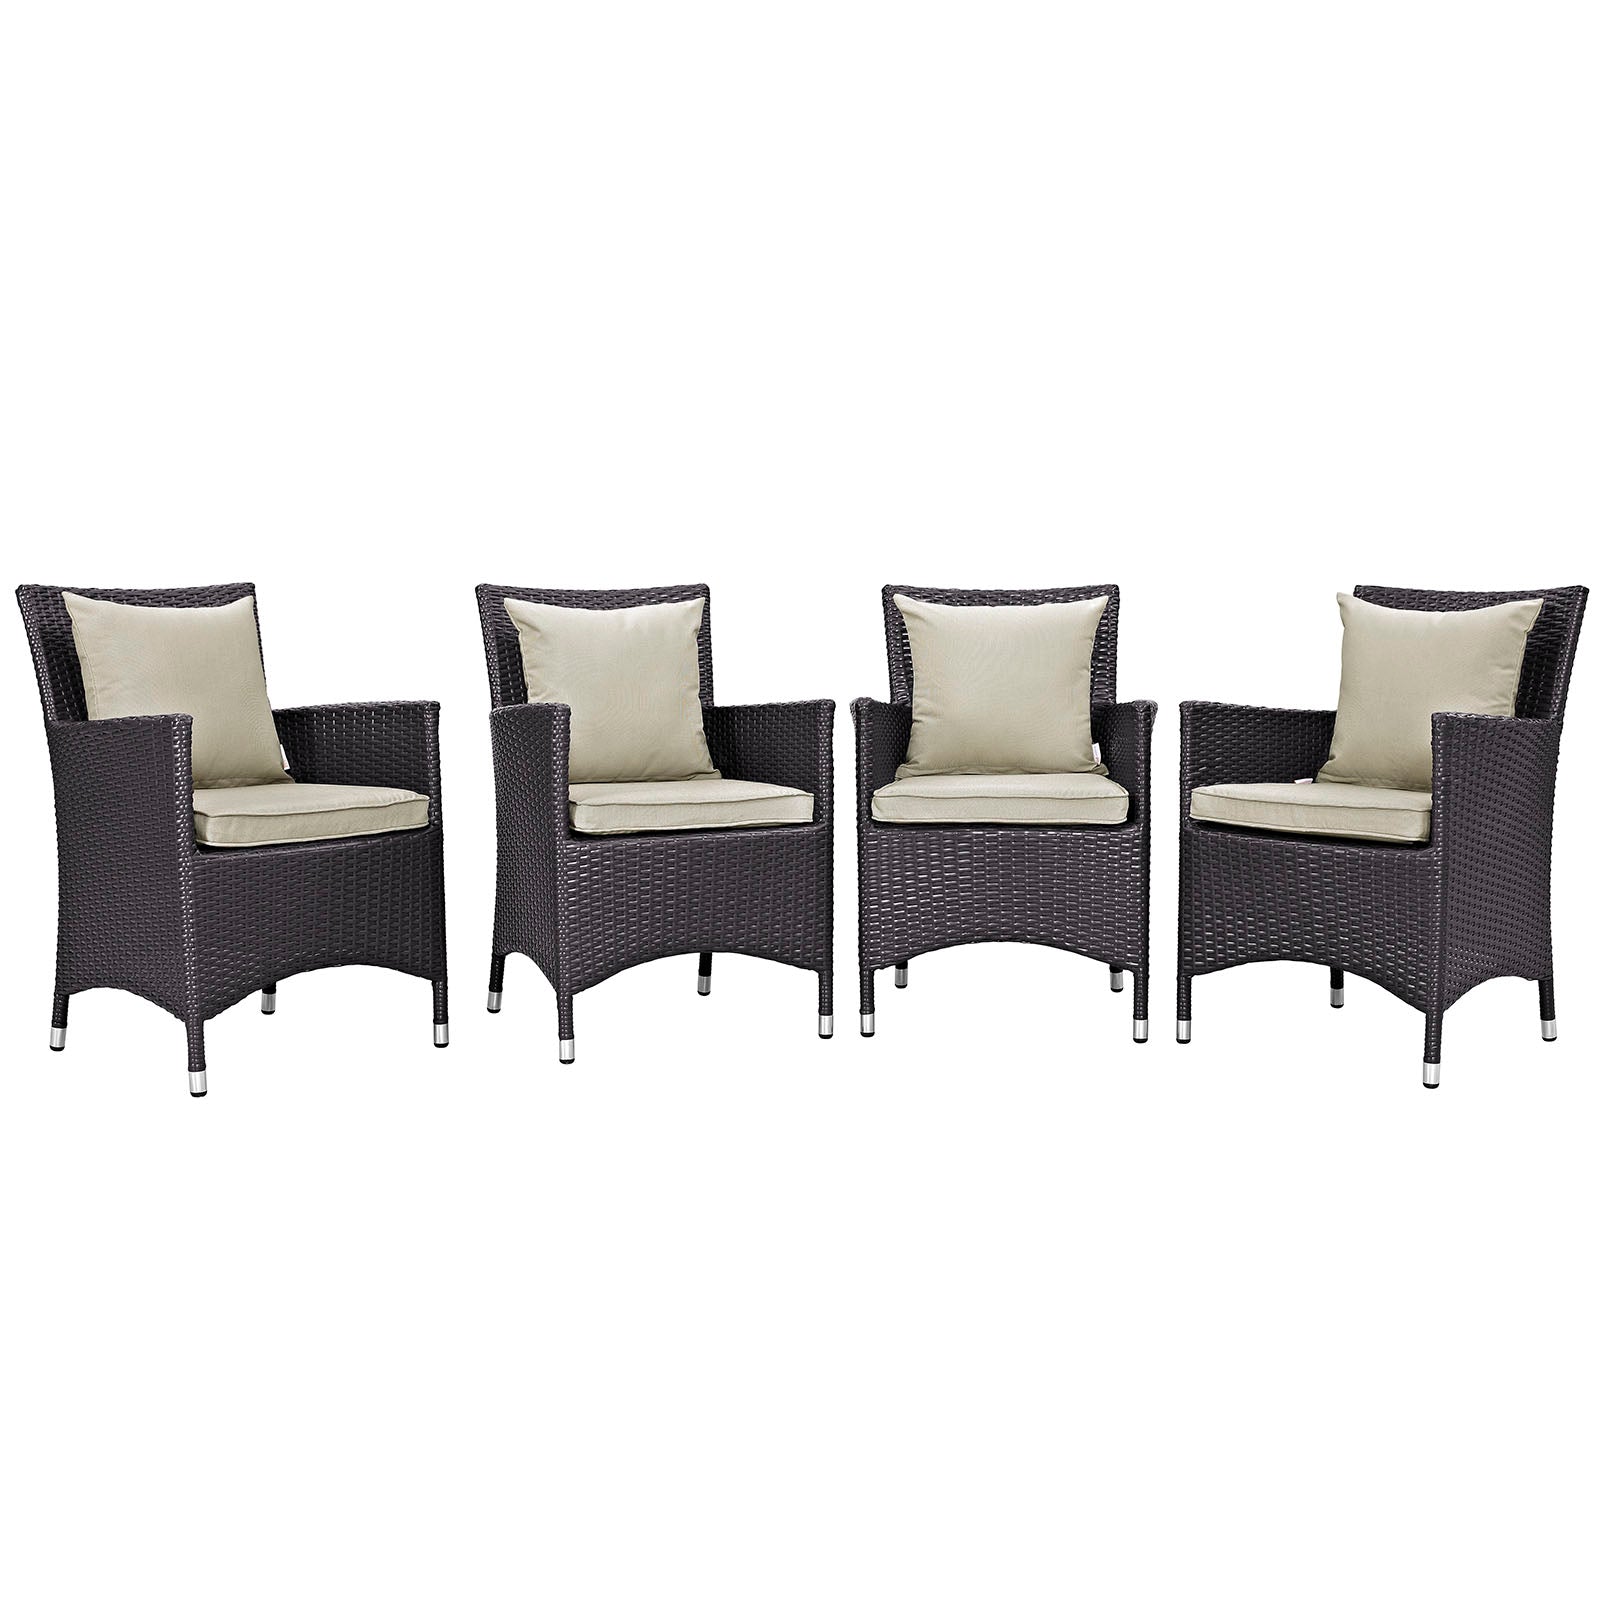 Convene 4 Piece Outdoor Patio Dining Set - East Shore Modern Home Furnishings